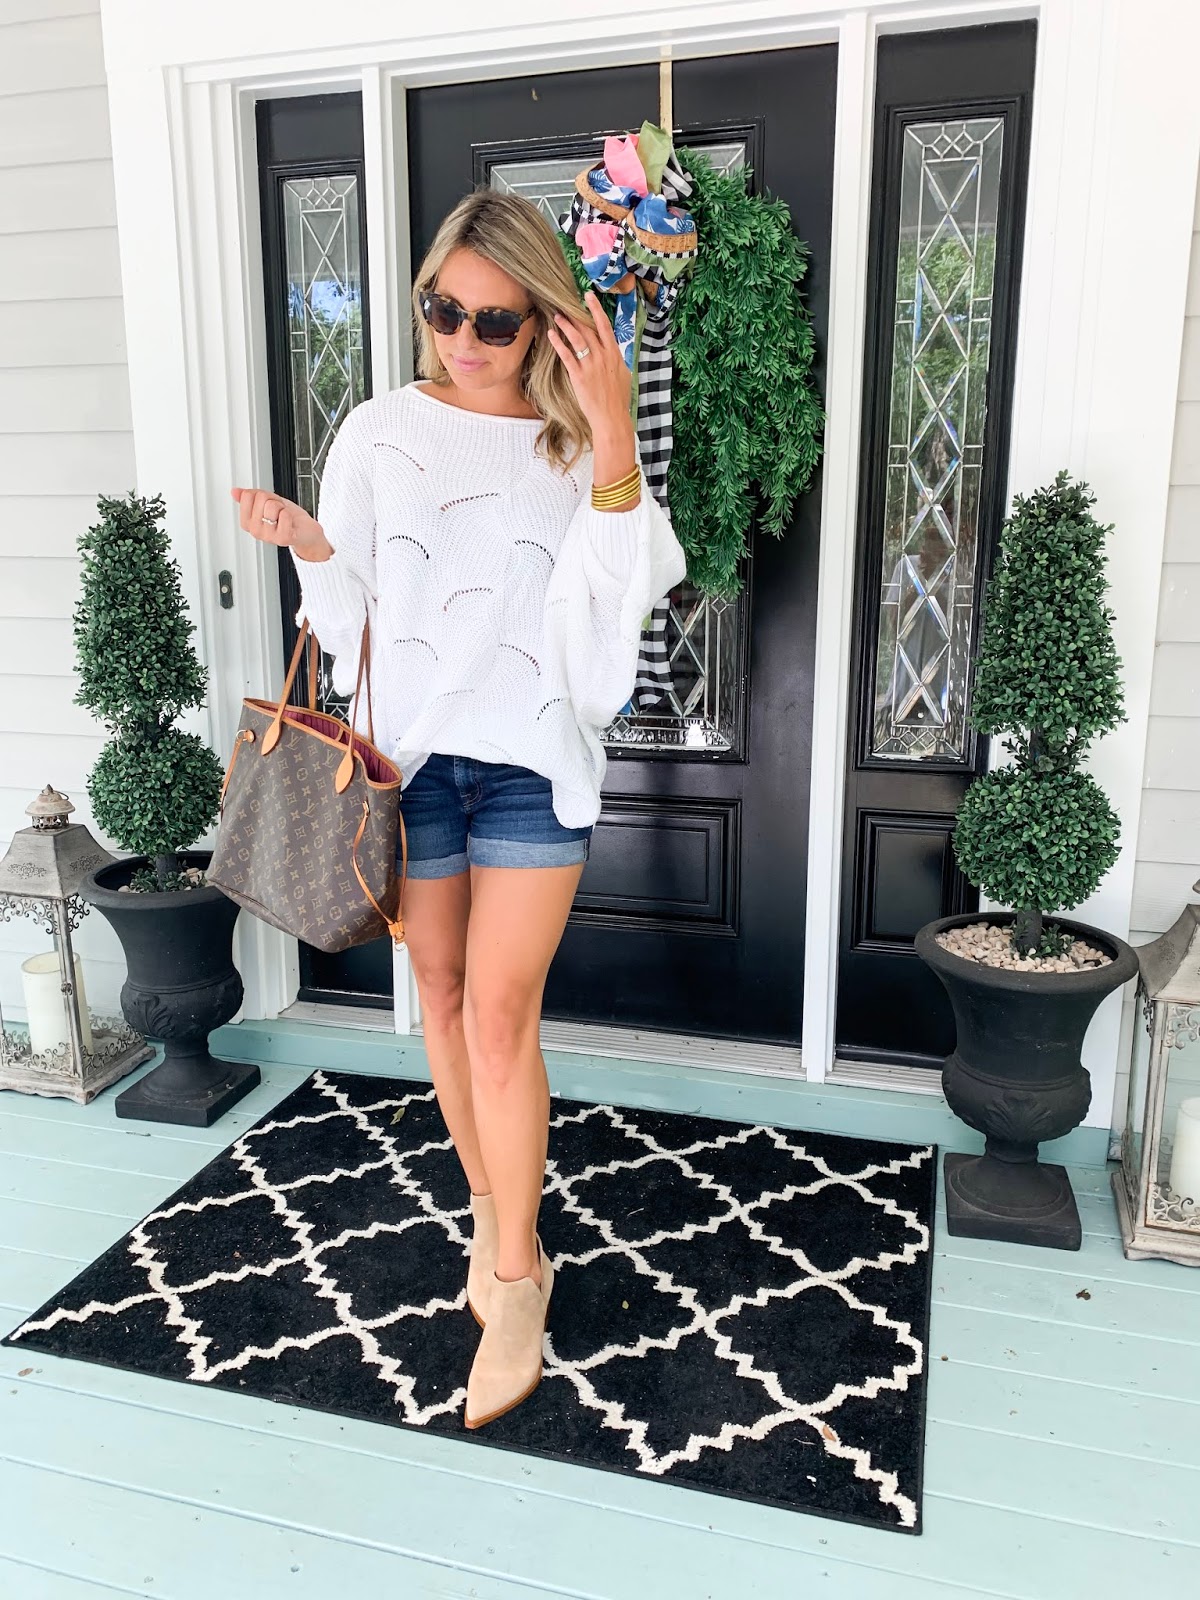 Try-On Haul, Southern Style